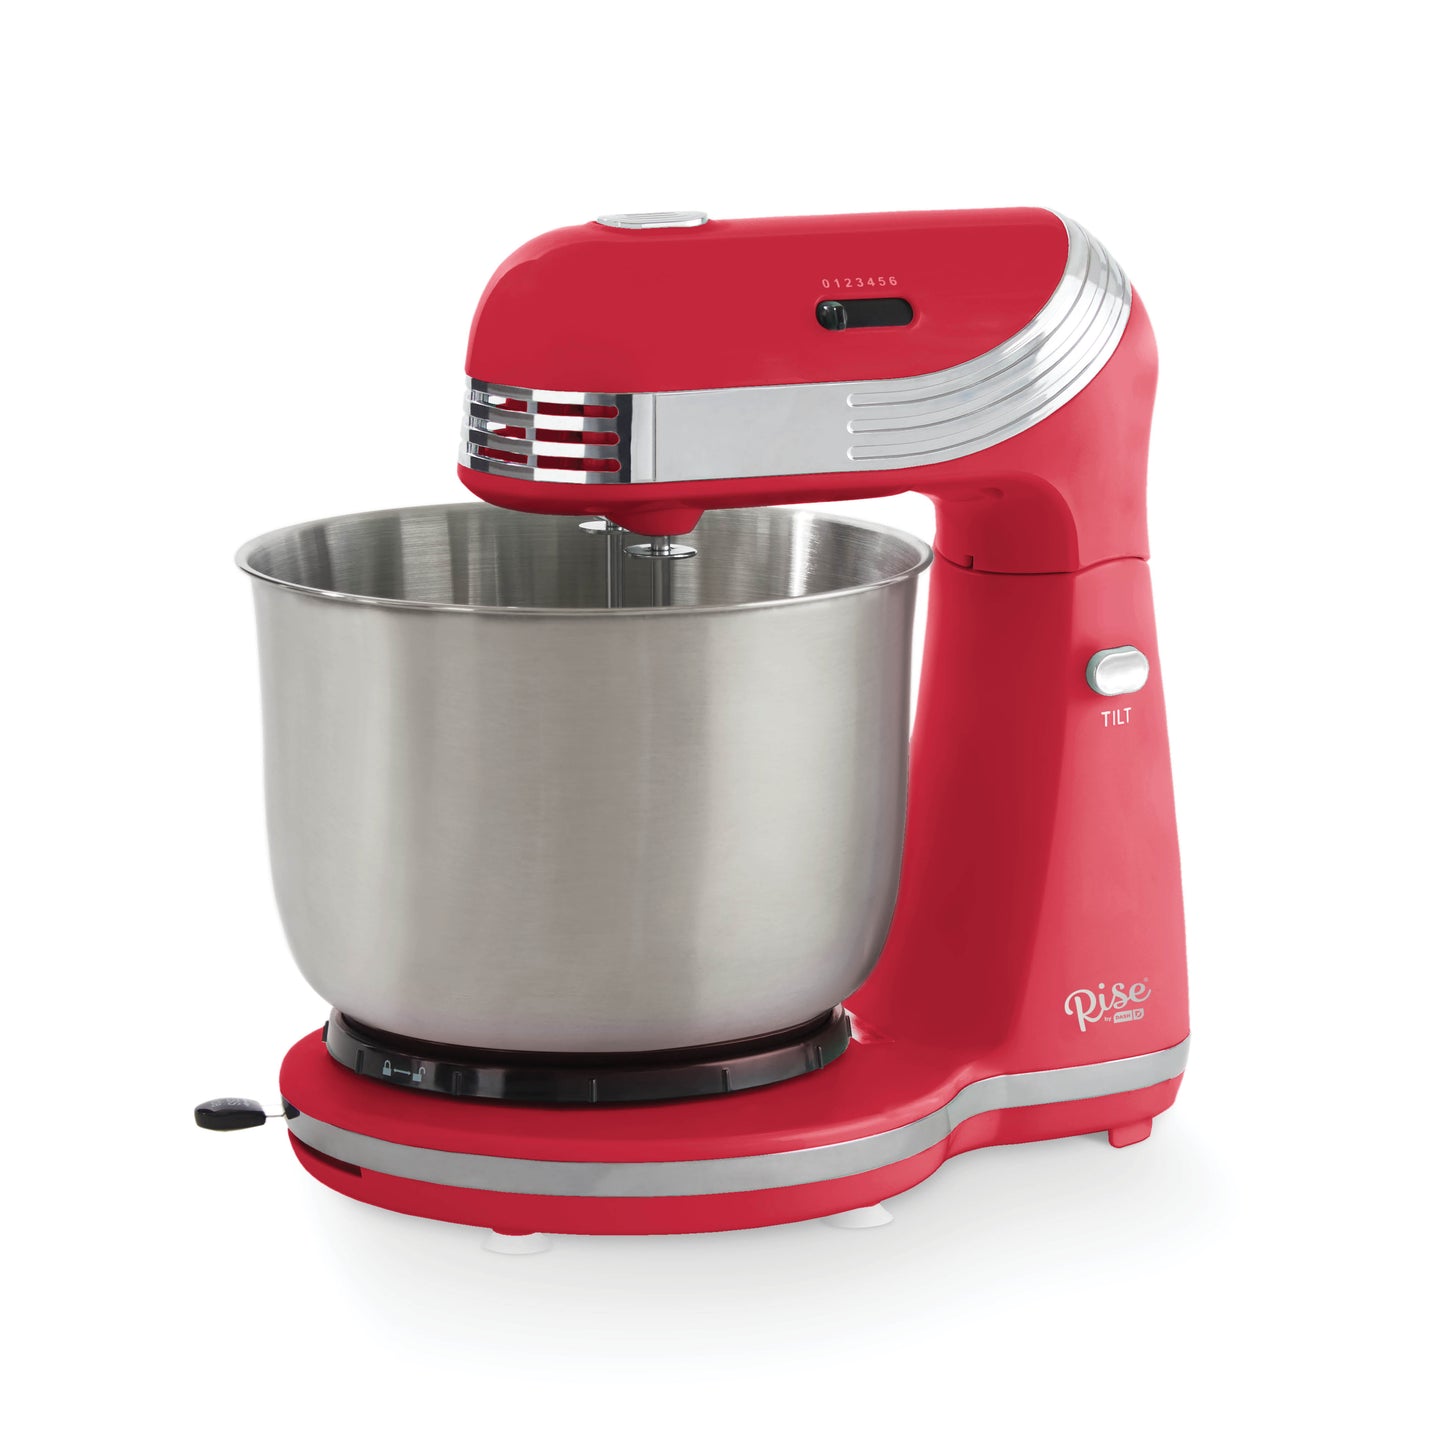 Rise By Dash Stand Mixer, 6 Speed, 3 Quart Sky Blue